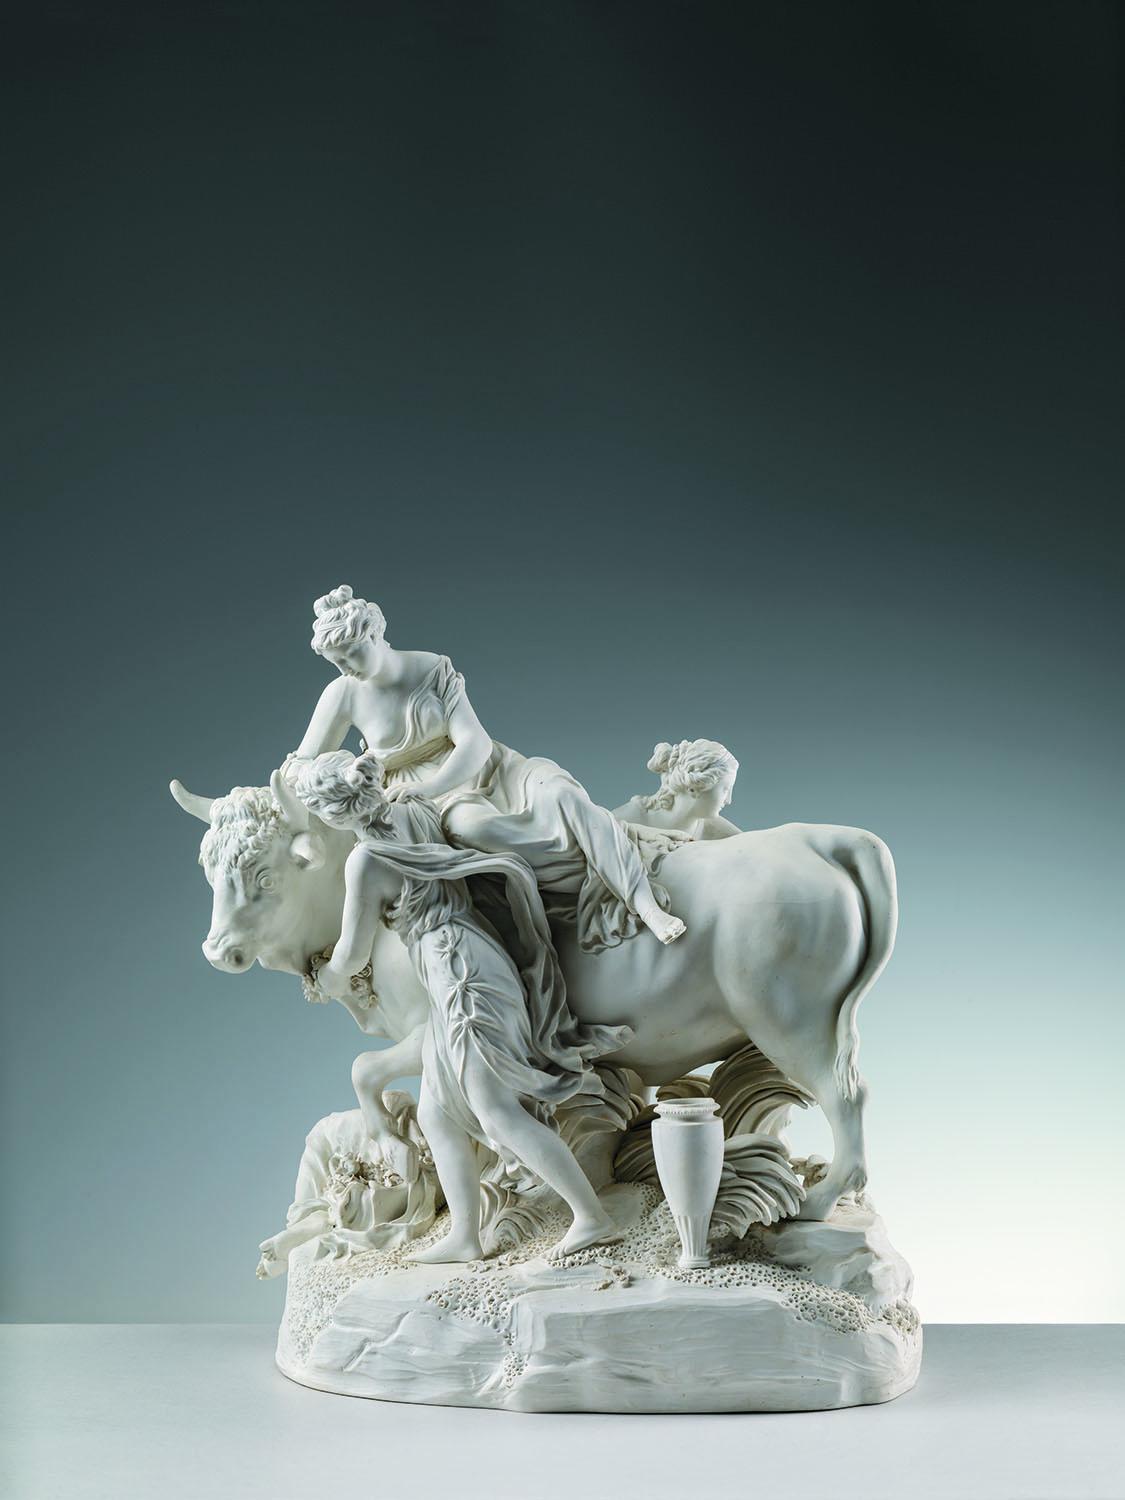 The Princes' Fragile Treasures. The Paths of Porcelain between Vienna and Florence